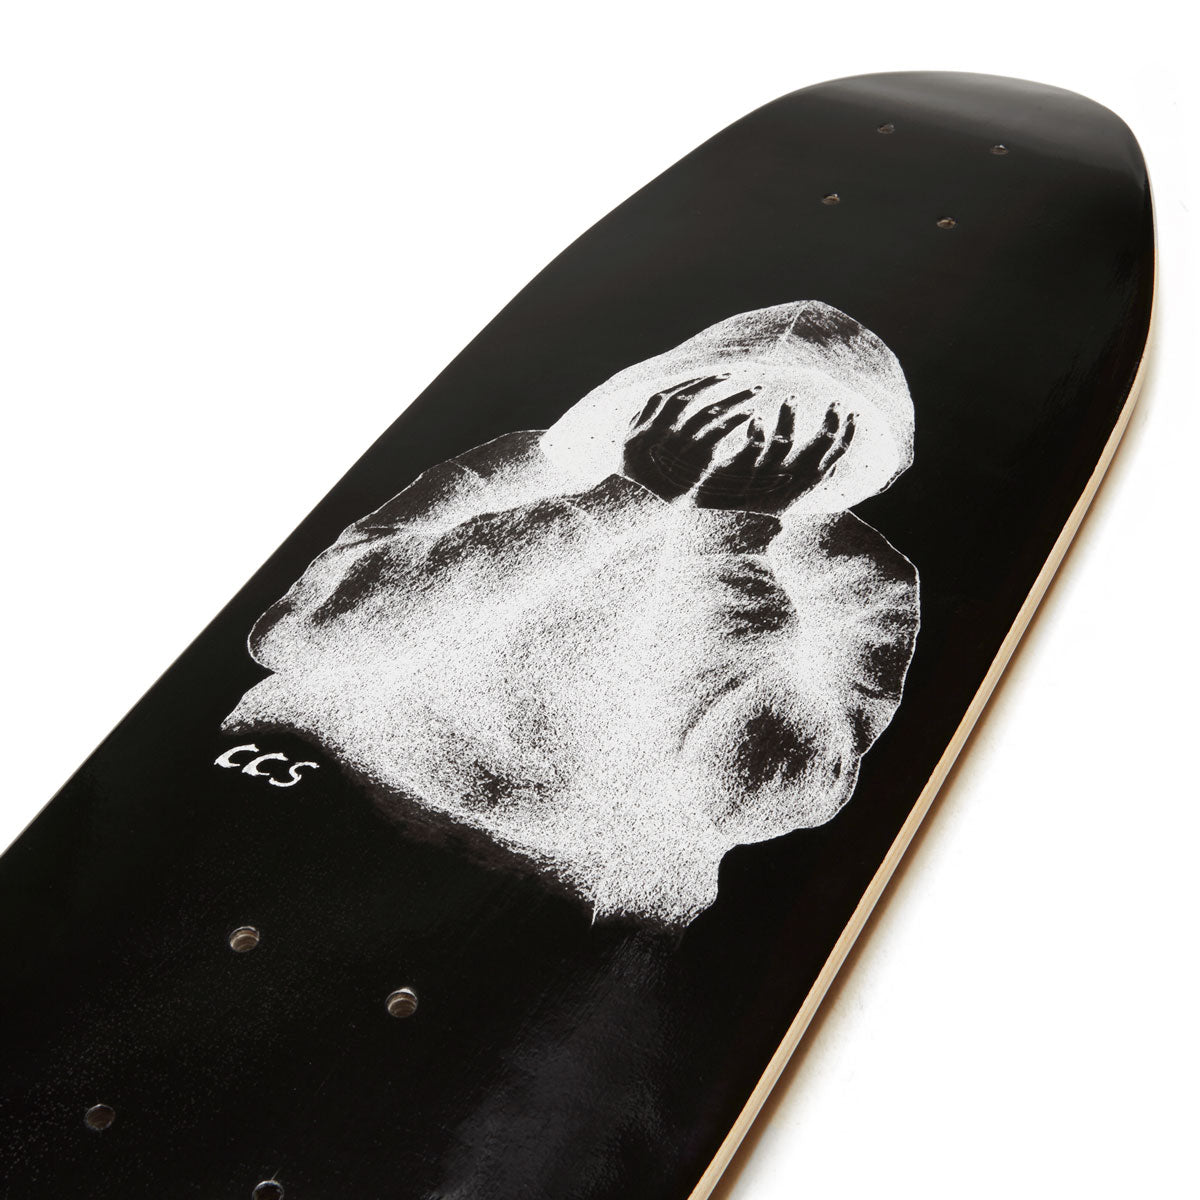 CCS Smile on The Surface Crusier Skateboard Deck - Black image 3